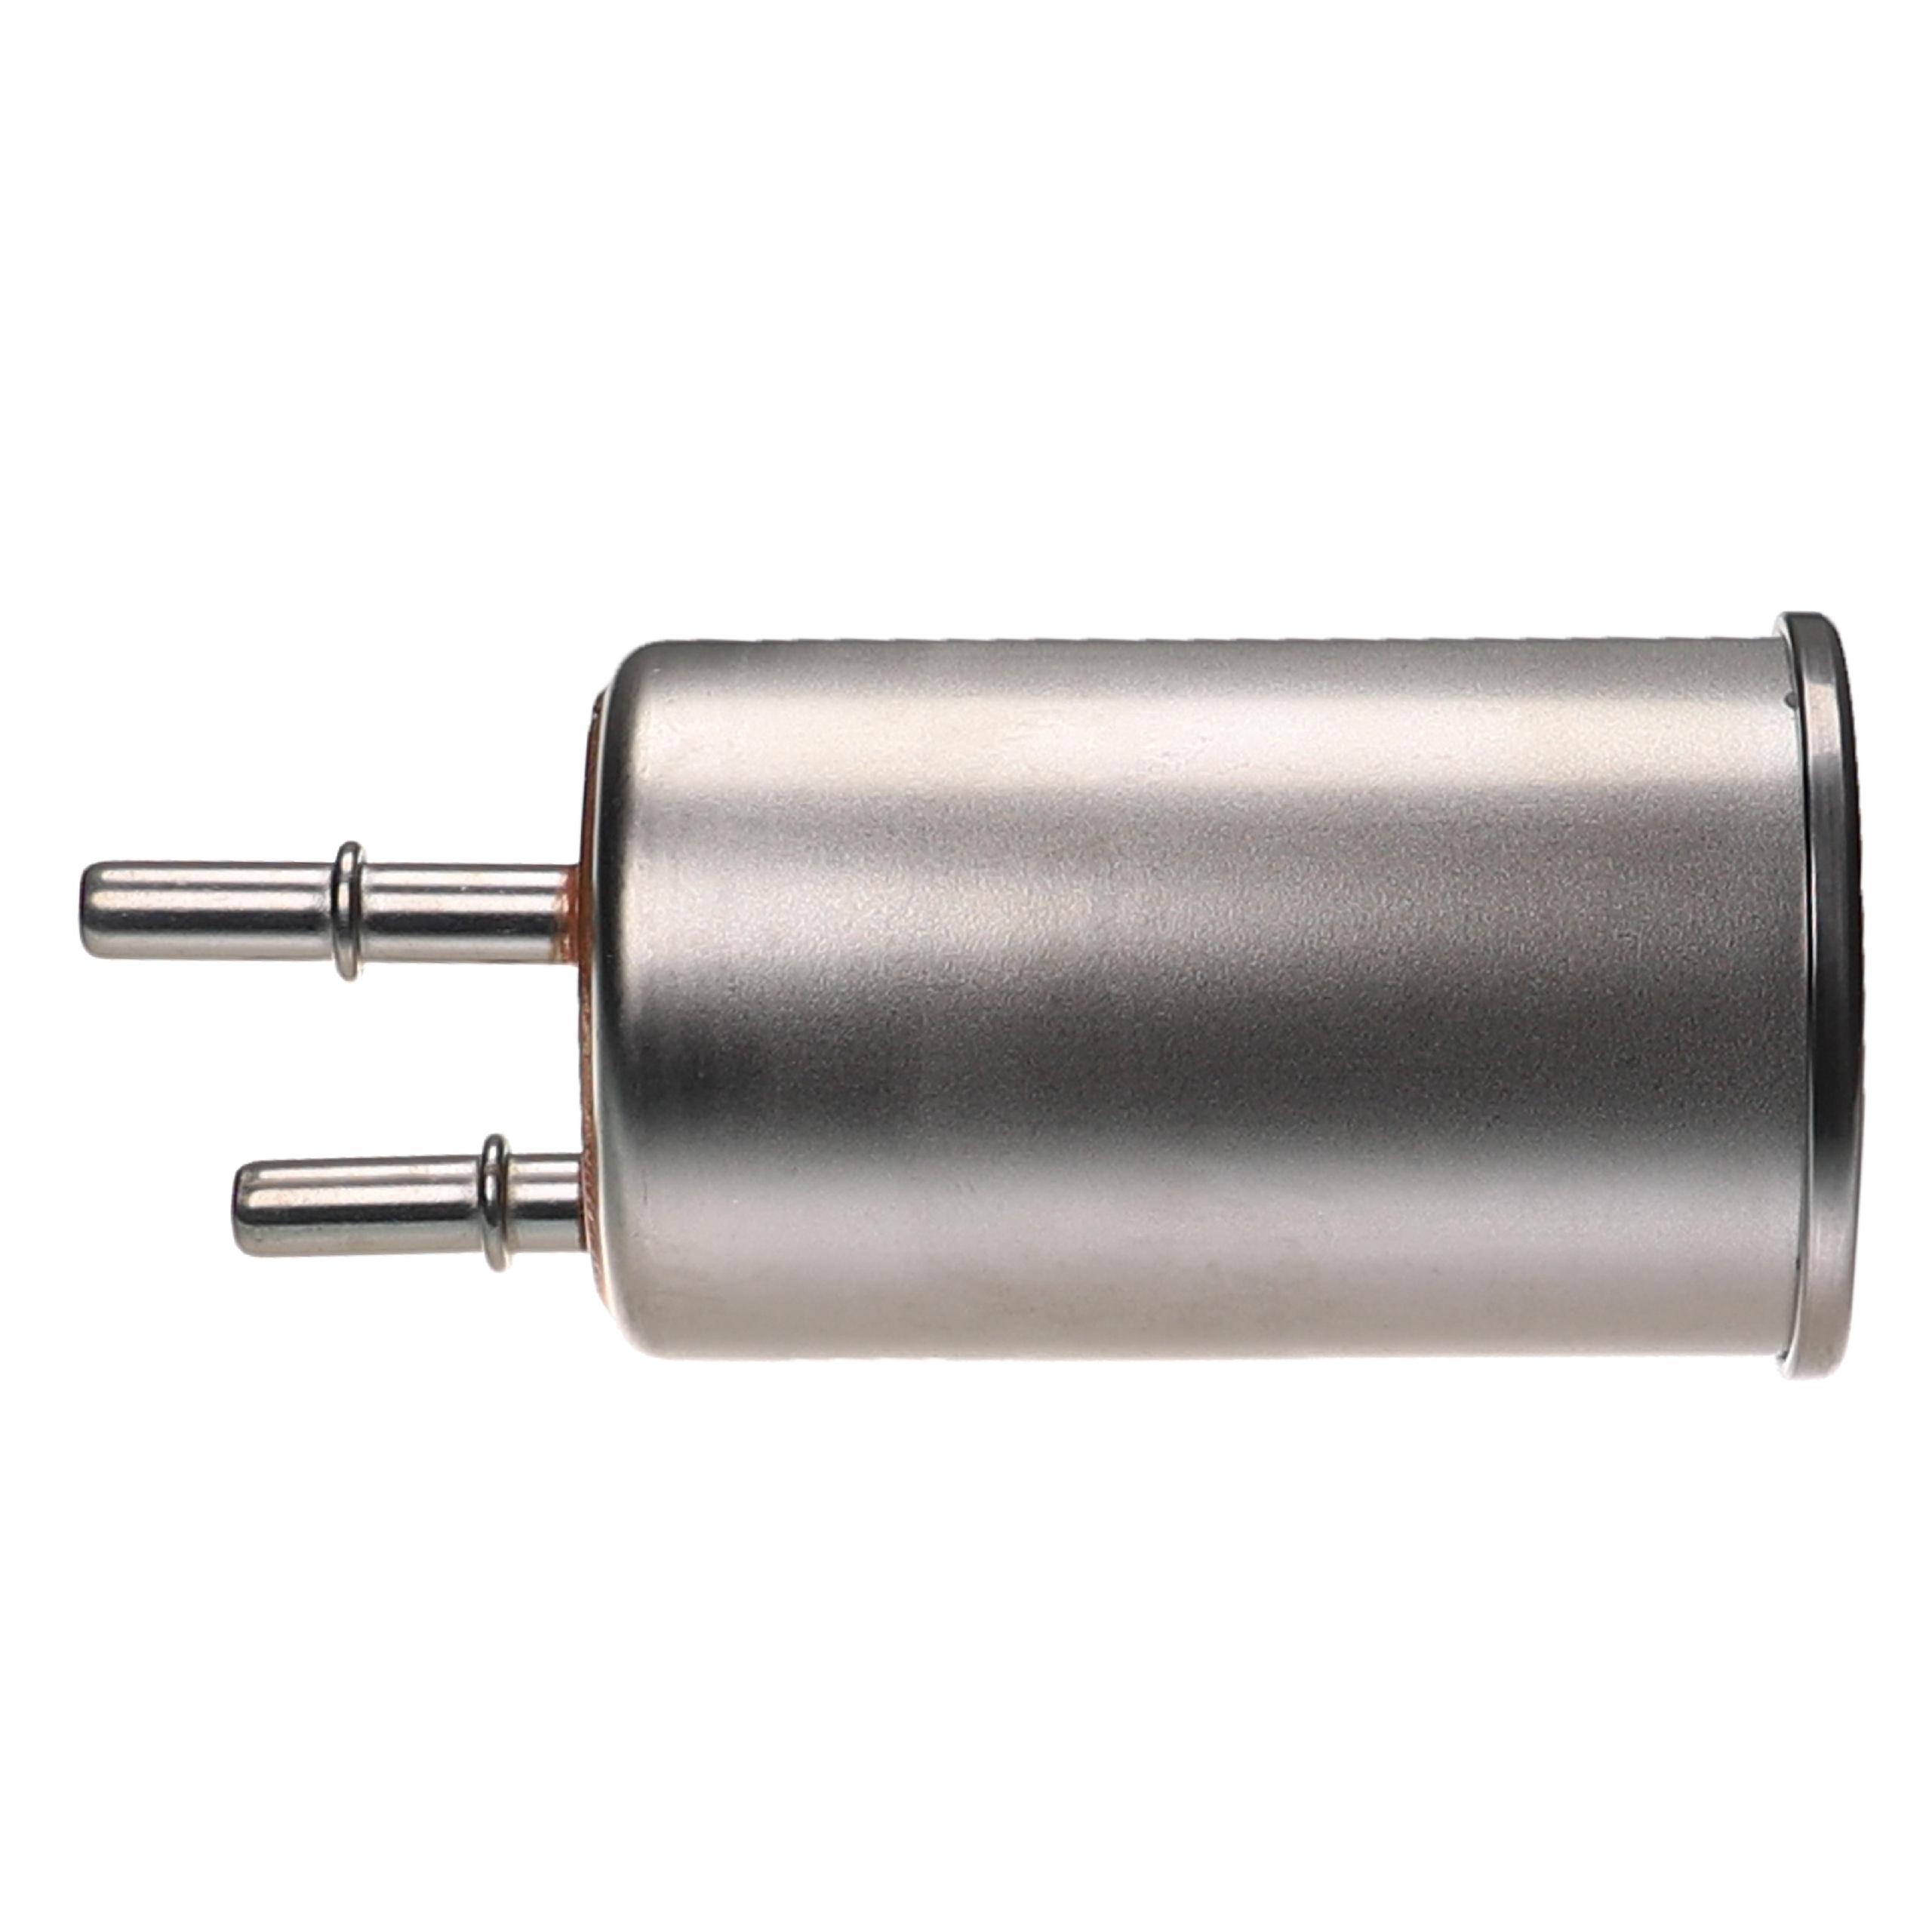 Car Fuel Filter as Replacement for A.L. filter ALG-4015/2